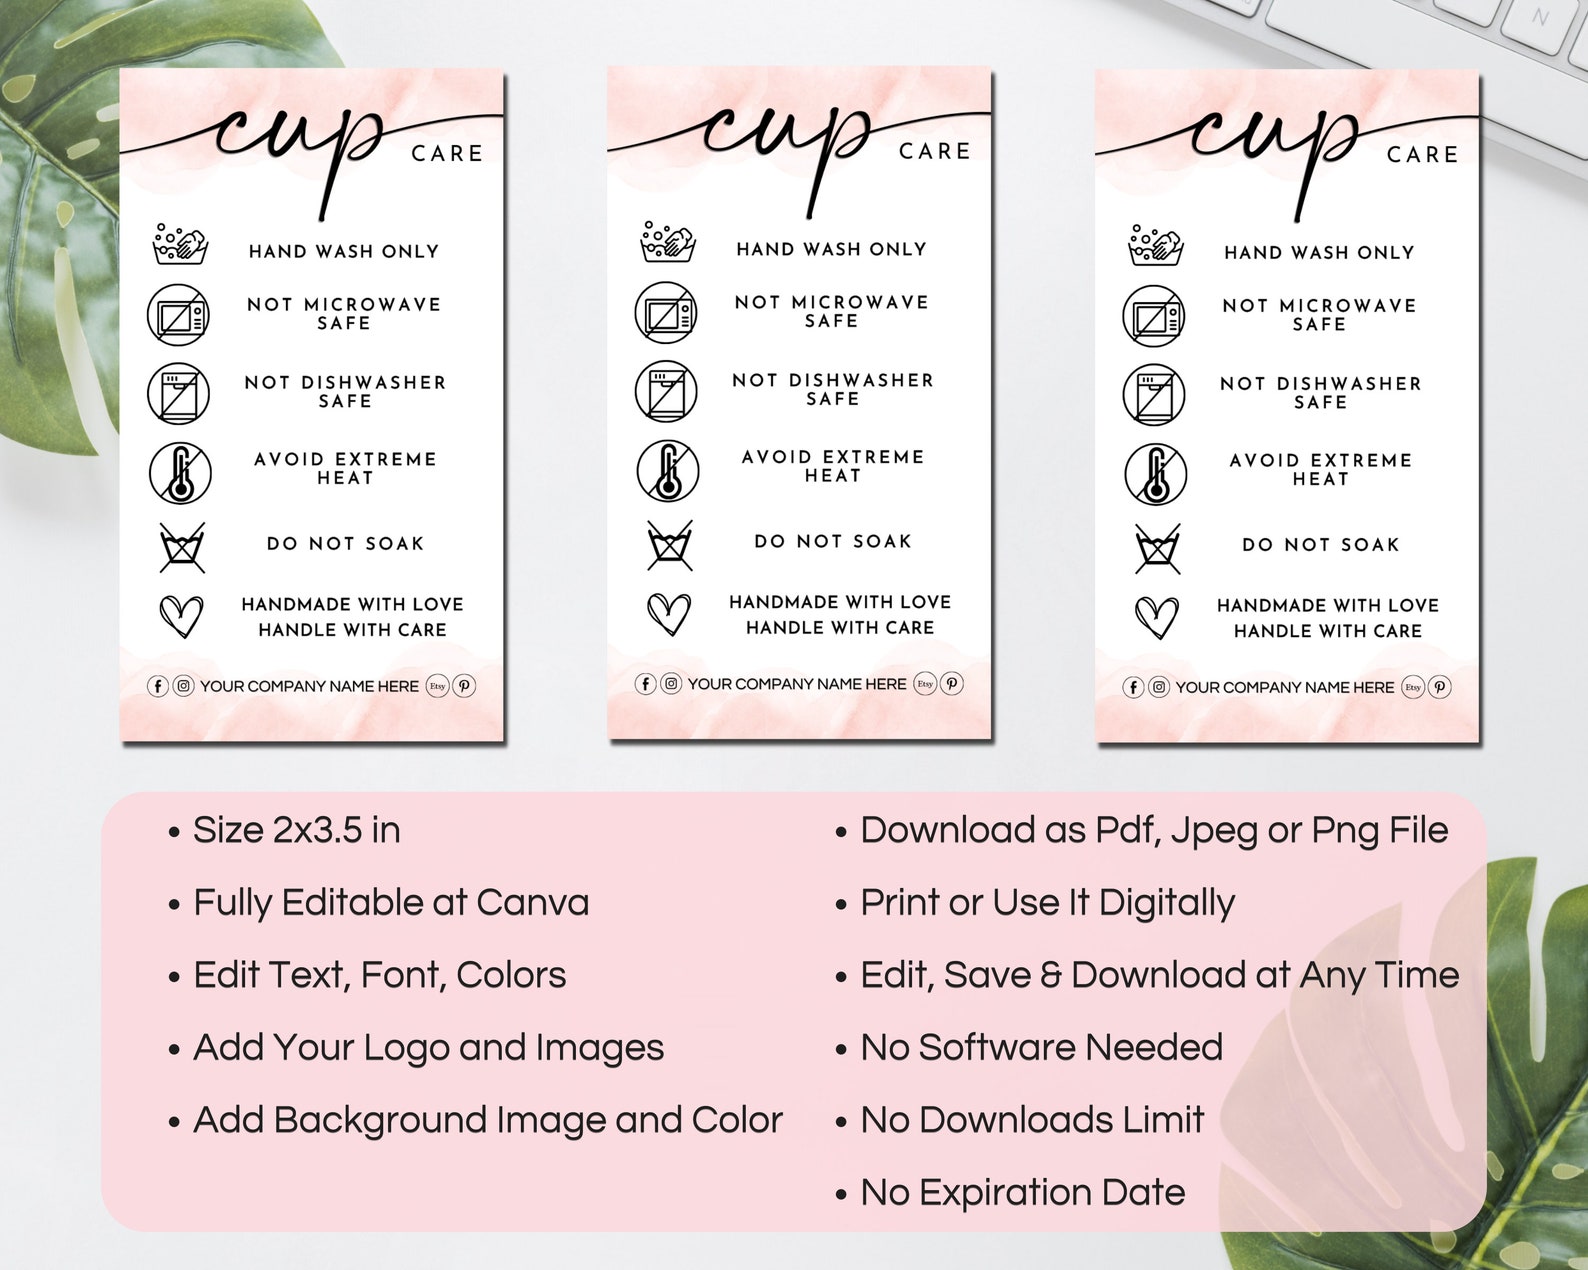 Cup Care Card Template Editable Cup Care Cards Printable - Etsy